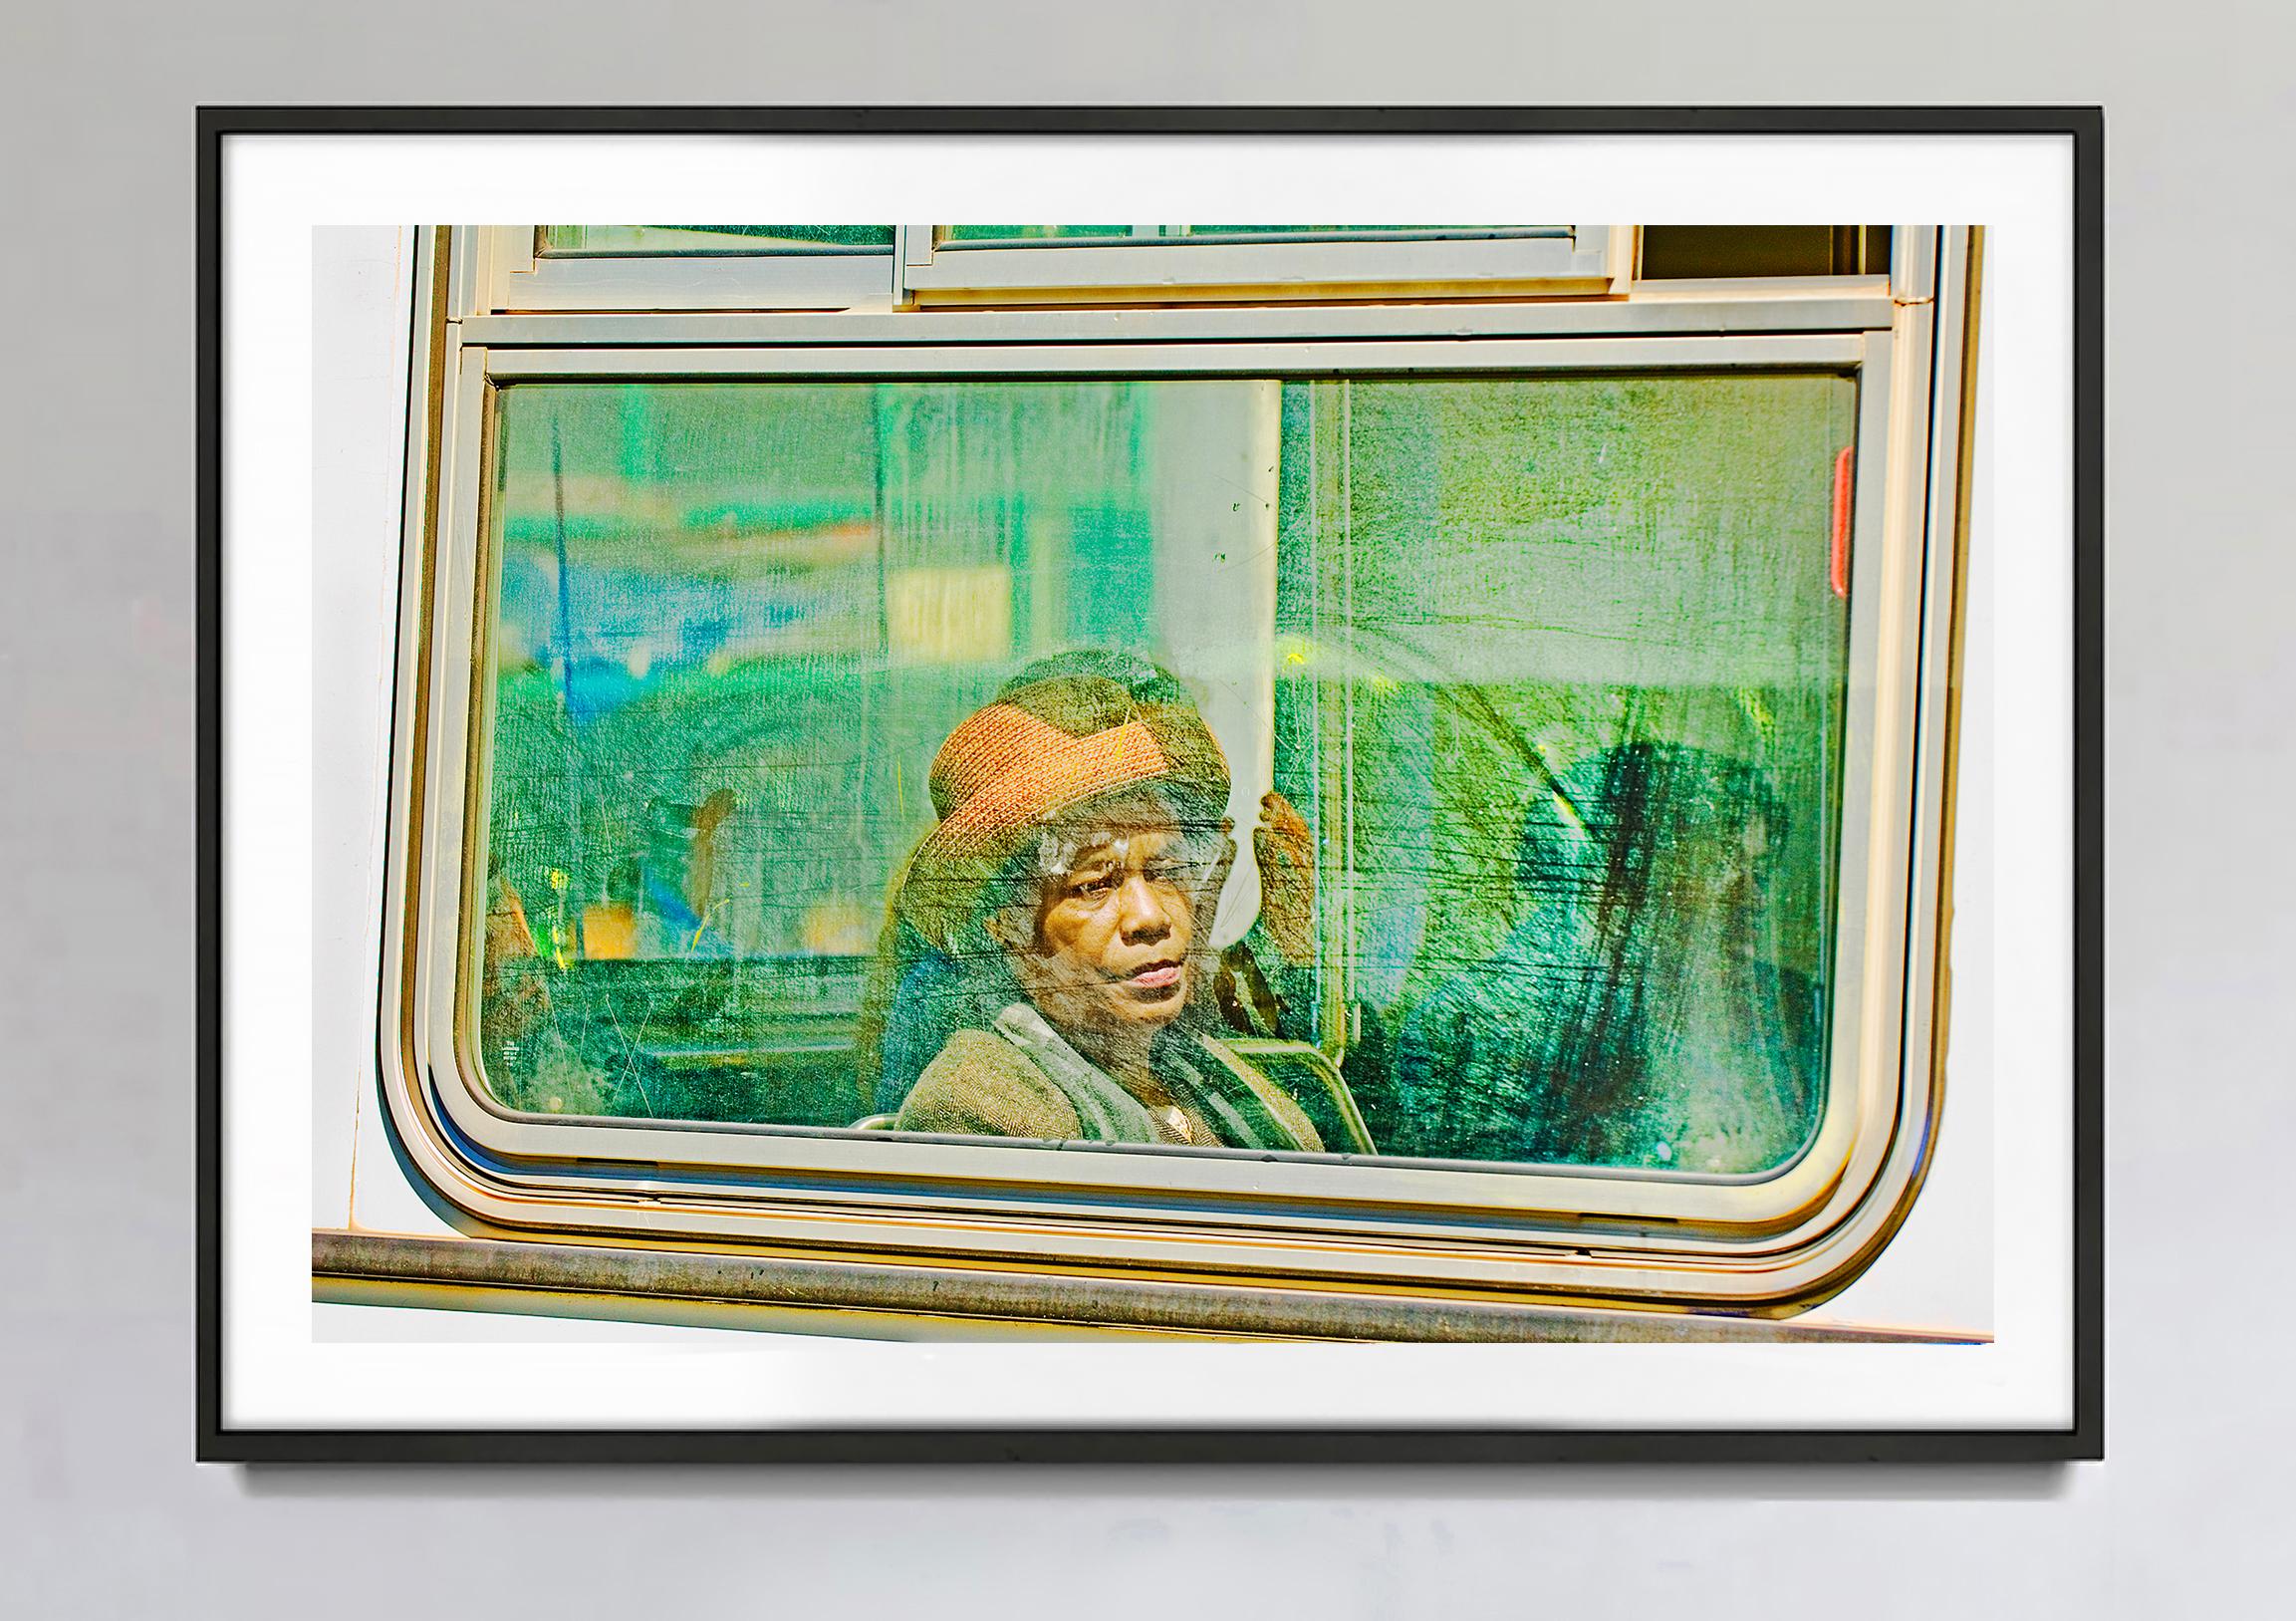 Women With Hat In Bus Window,  San Francisco - Photograph by Mitchell Funk